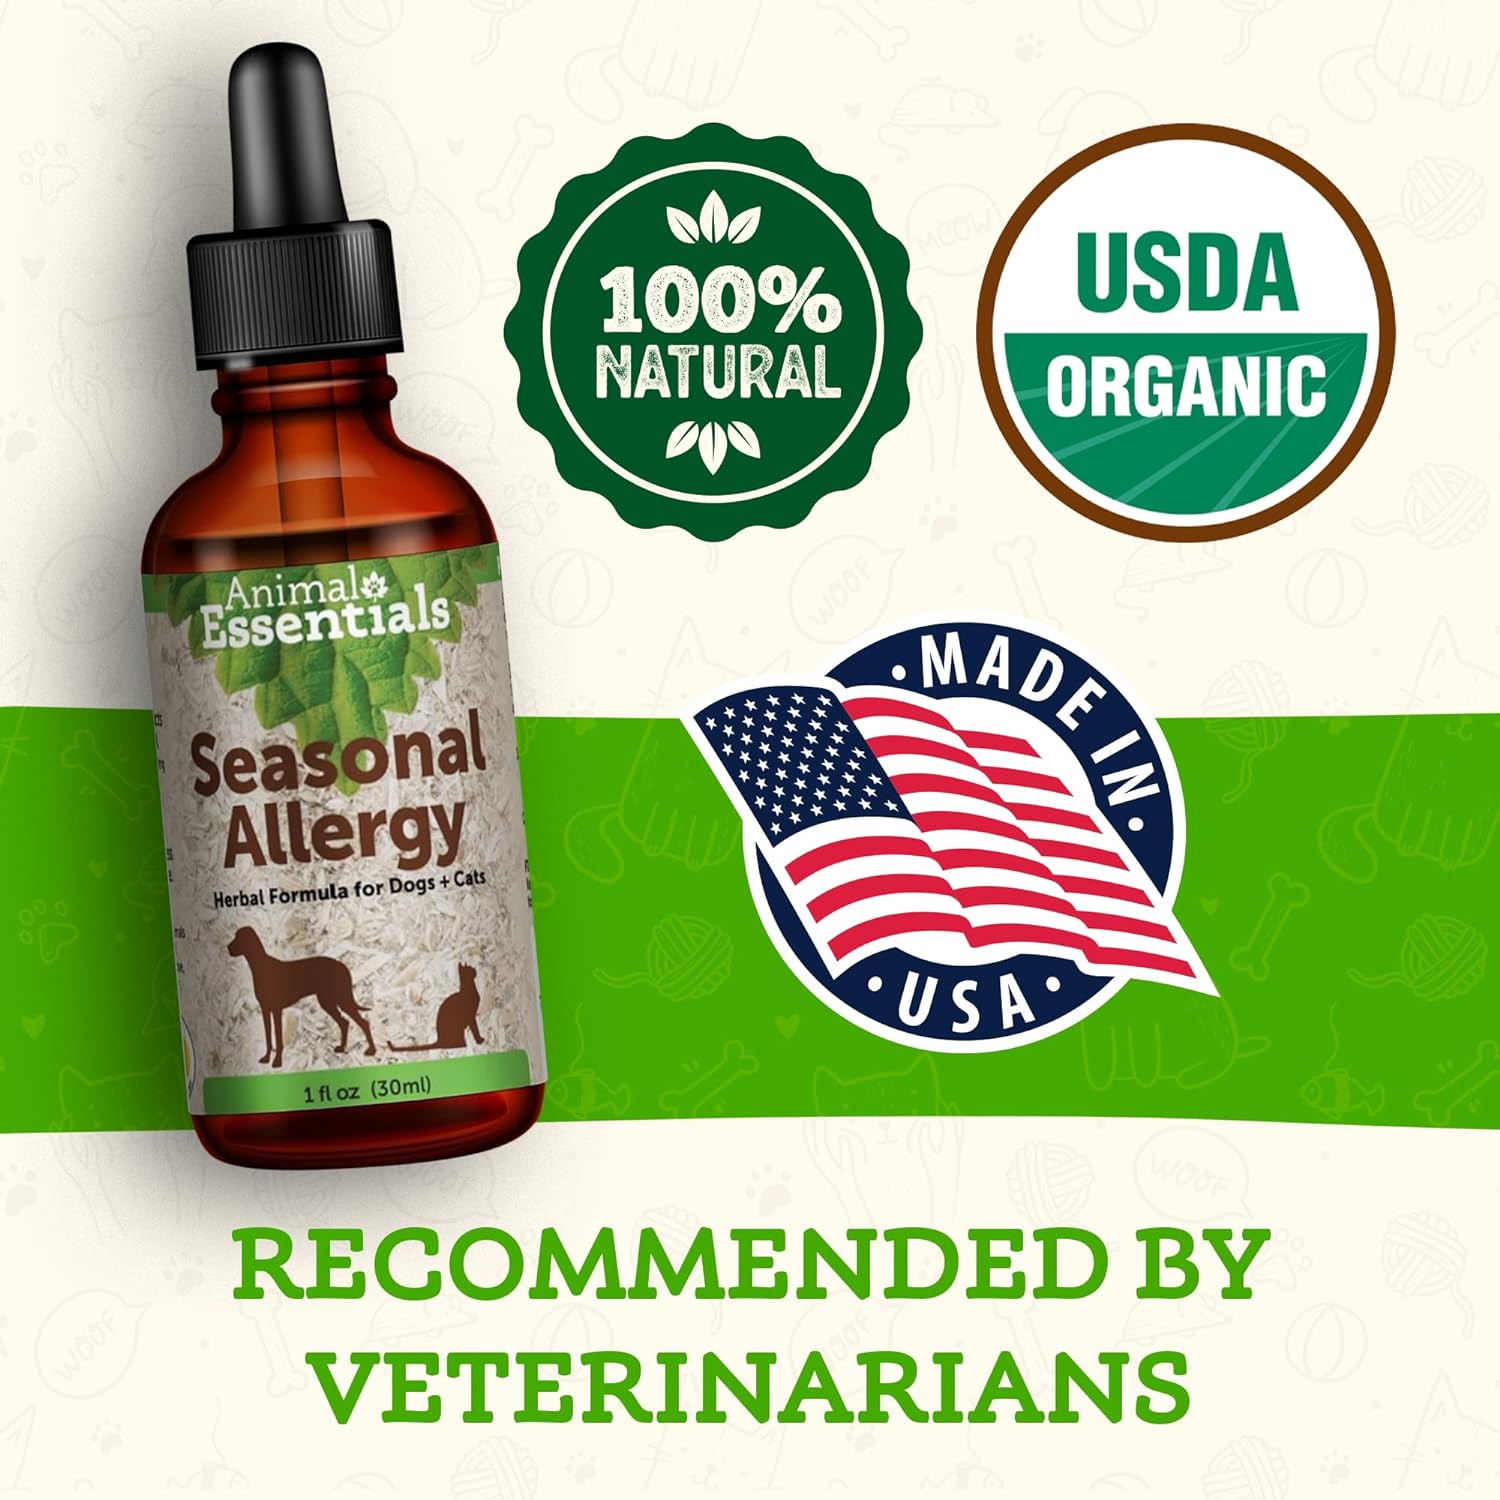 Animal Essentials Seasonal Allergy- Herbal Formula for Dogs & Cats for Occasional Allergy Relief, Sweet Taste, 100% Organic Human Grade Herbs, Veterinarian Recommended Animal Wellness Tonics - 1 Fl Oz : Pet Herbal Supplements : Pet Supplies